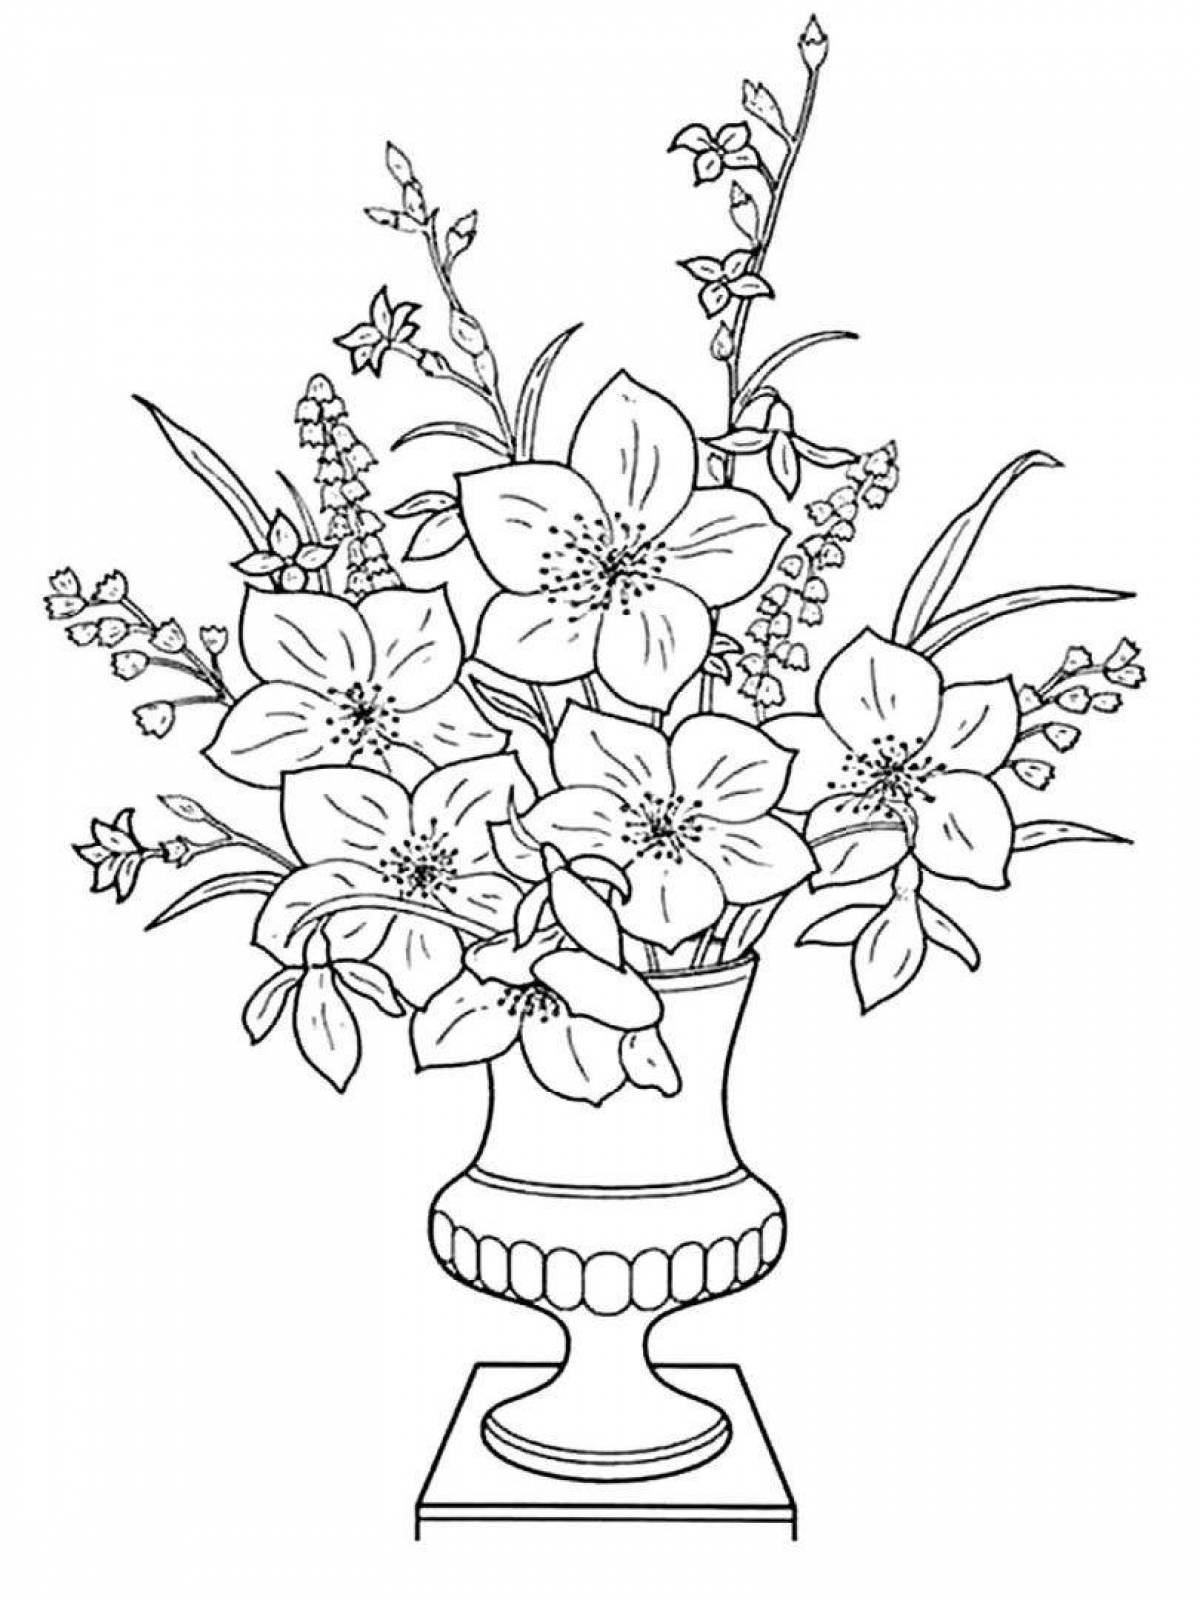 Exquisite bouquet of flowers in a vase coloring book